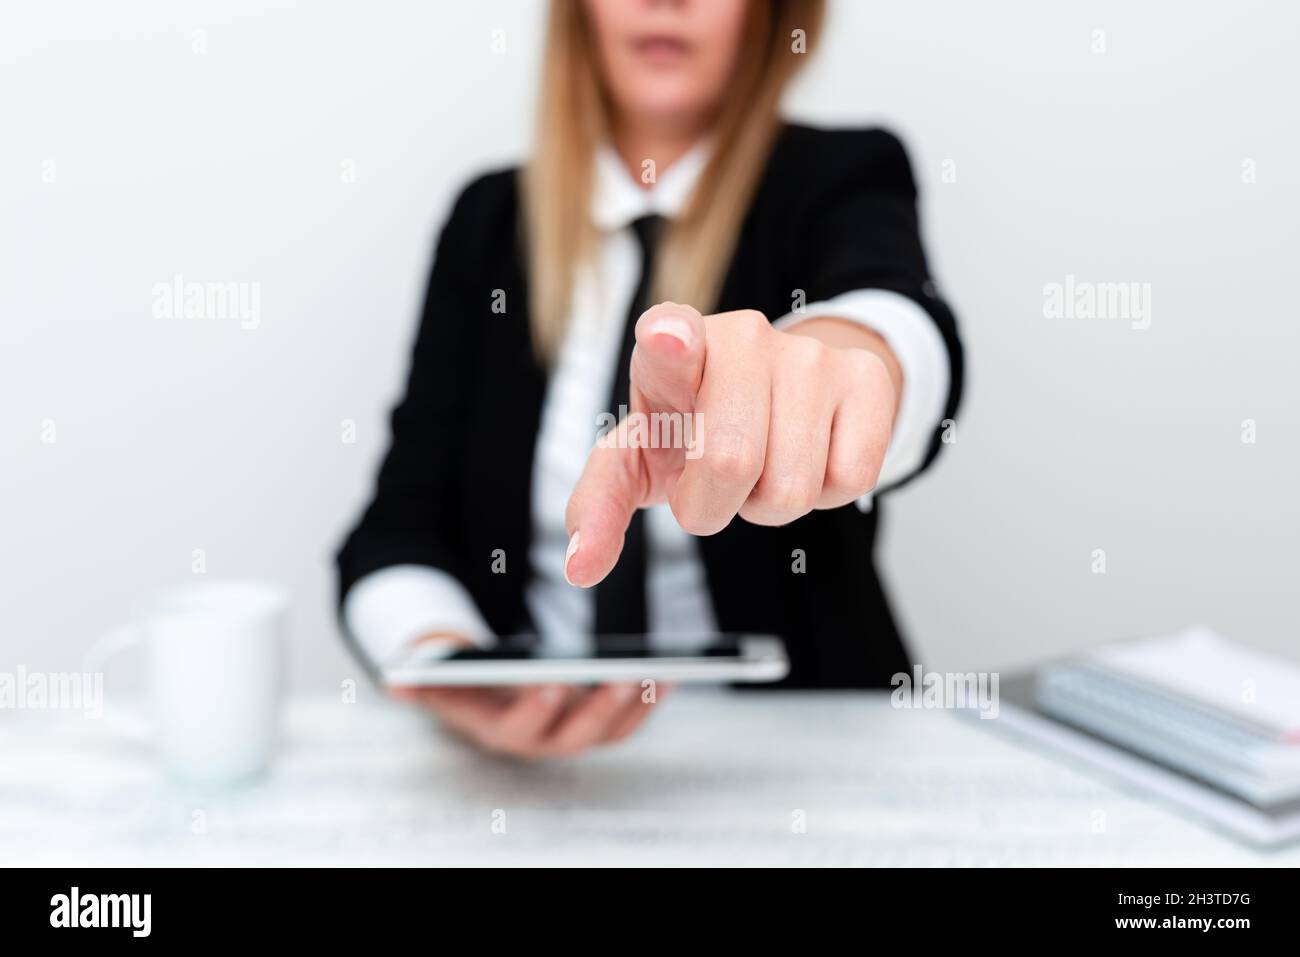 Presenting Corporate Business Data, Discussing Company Problems, Abstract Evaluating Employee Procedure, Computer Presentation I Stock Photo